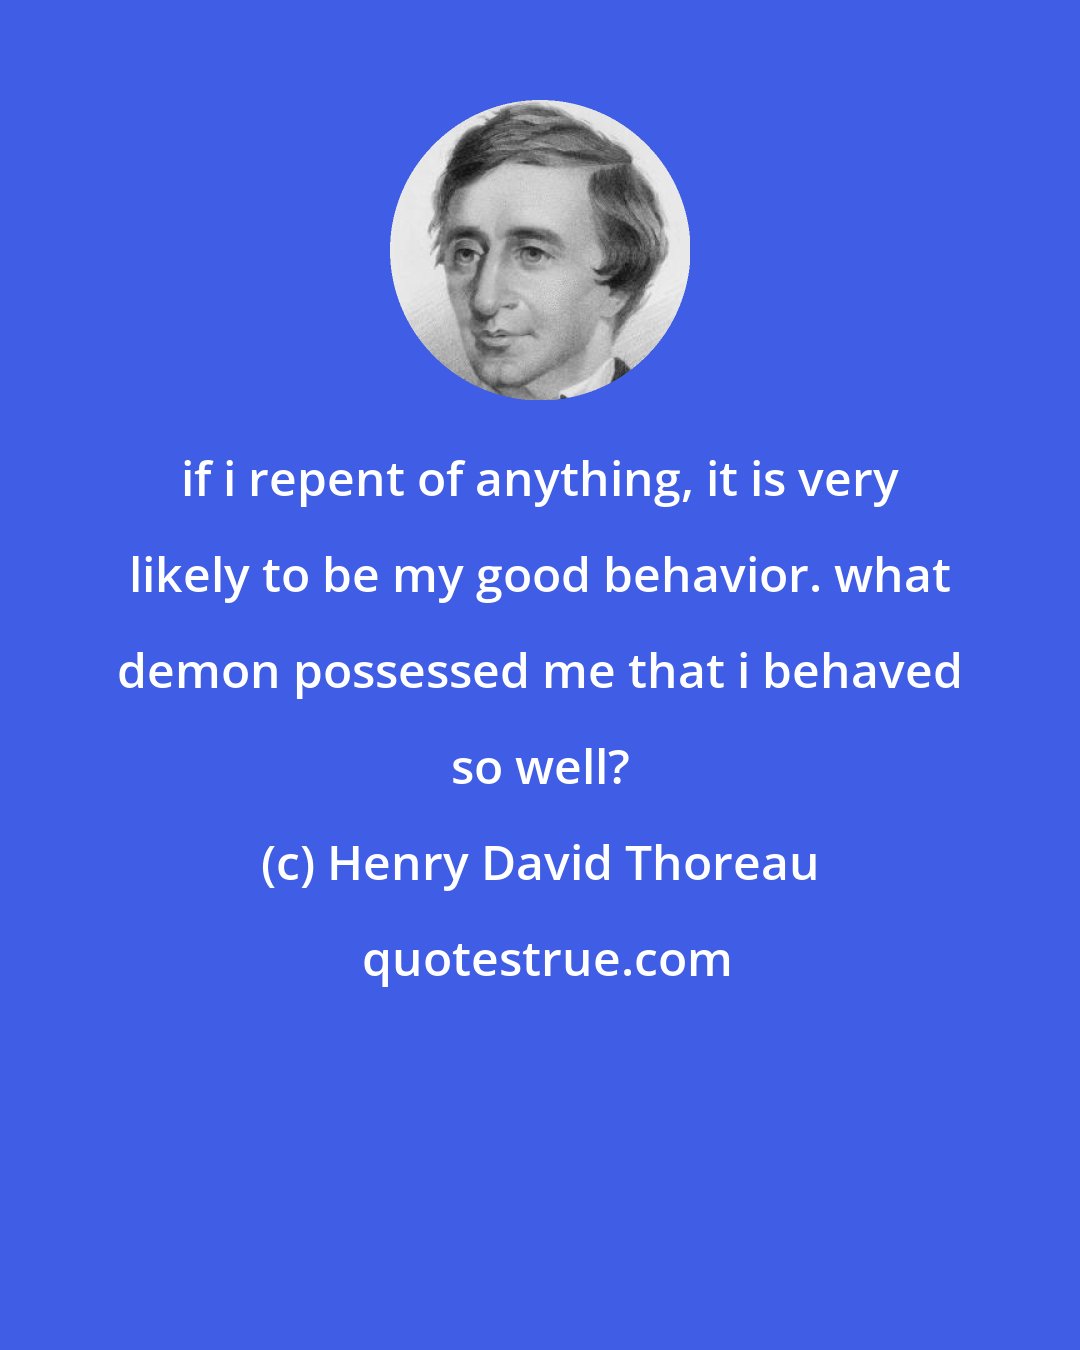 Henry David Thoreau: if i repent of anything, it is very likely to be my good behavior. what demon possessed me that i behaved so well?